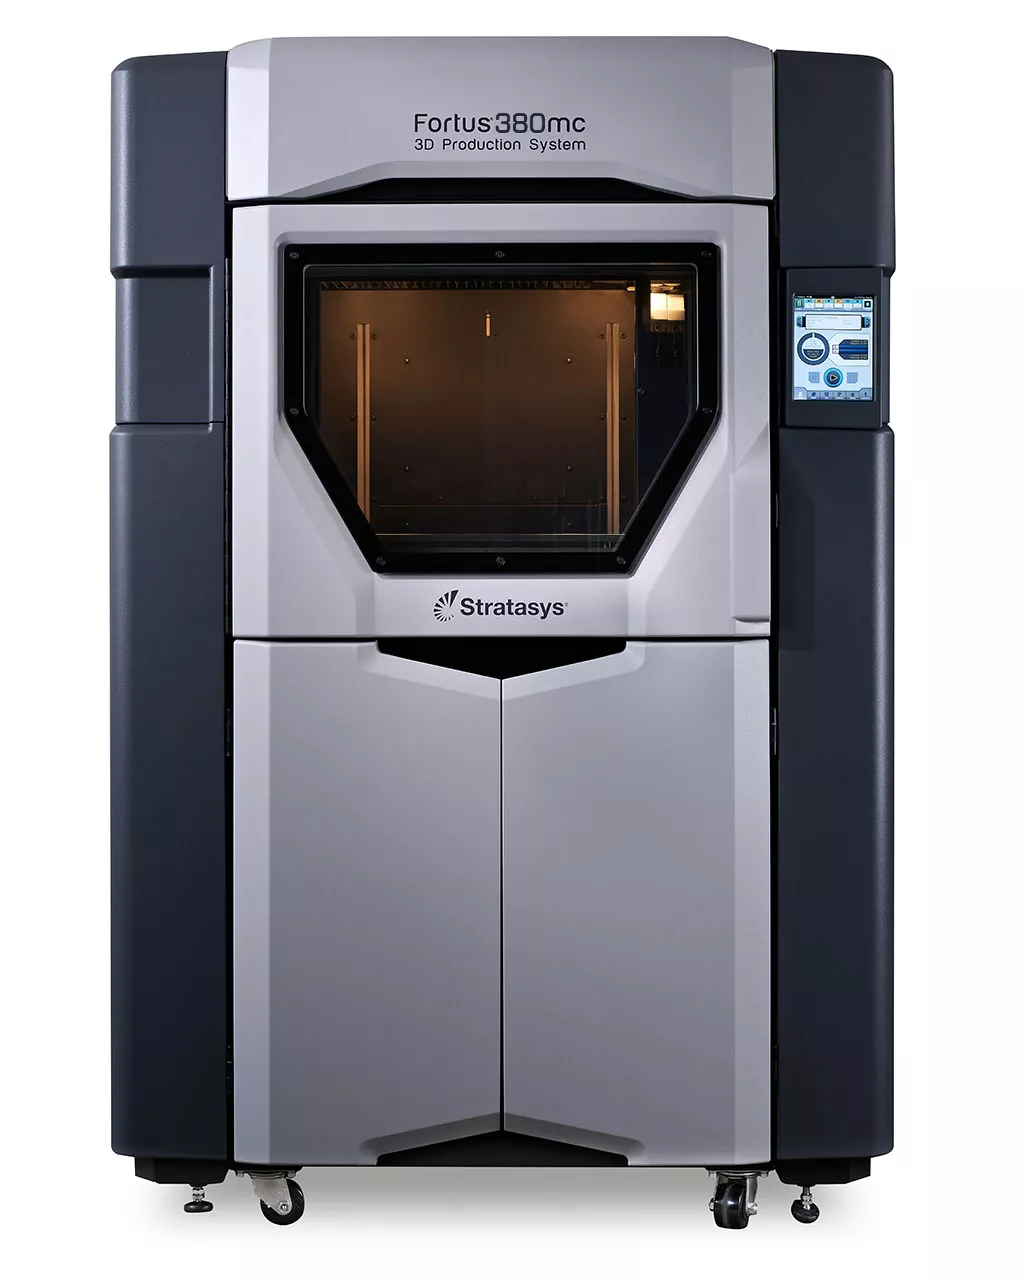 Fortus 380mc 3D Printer available from GoEngineer